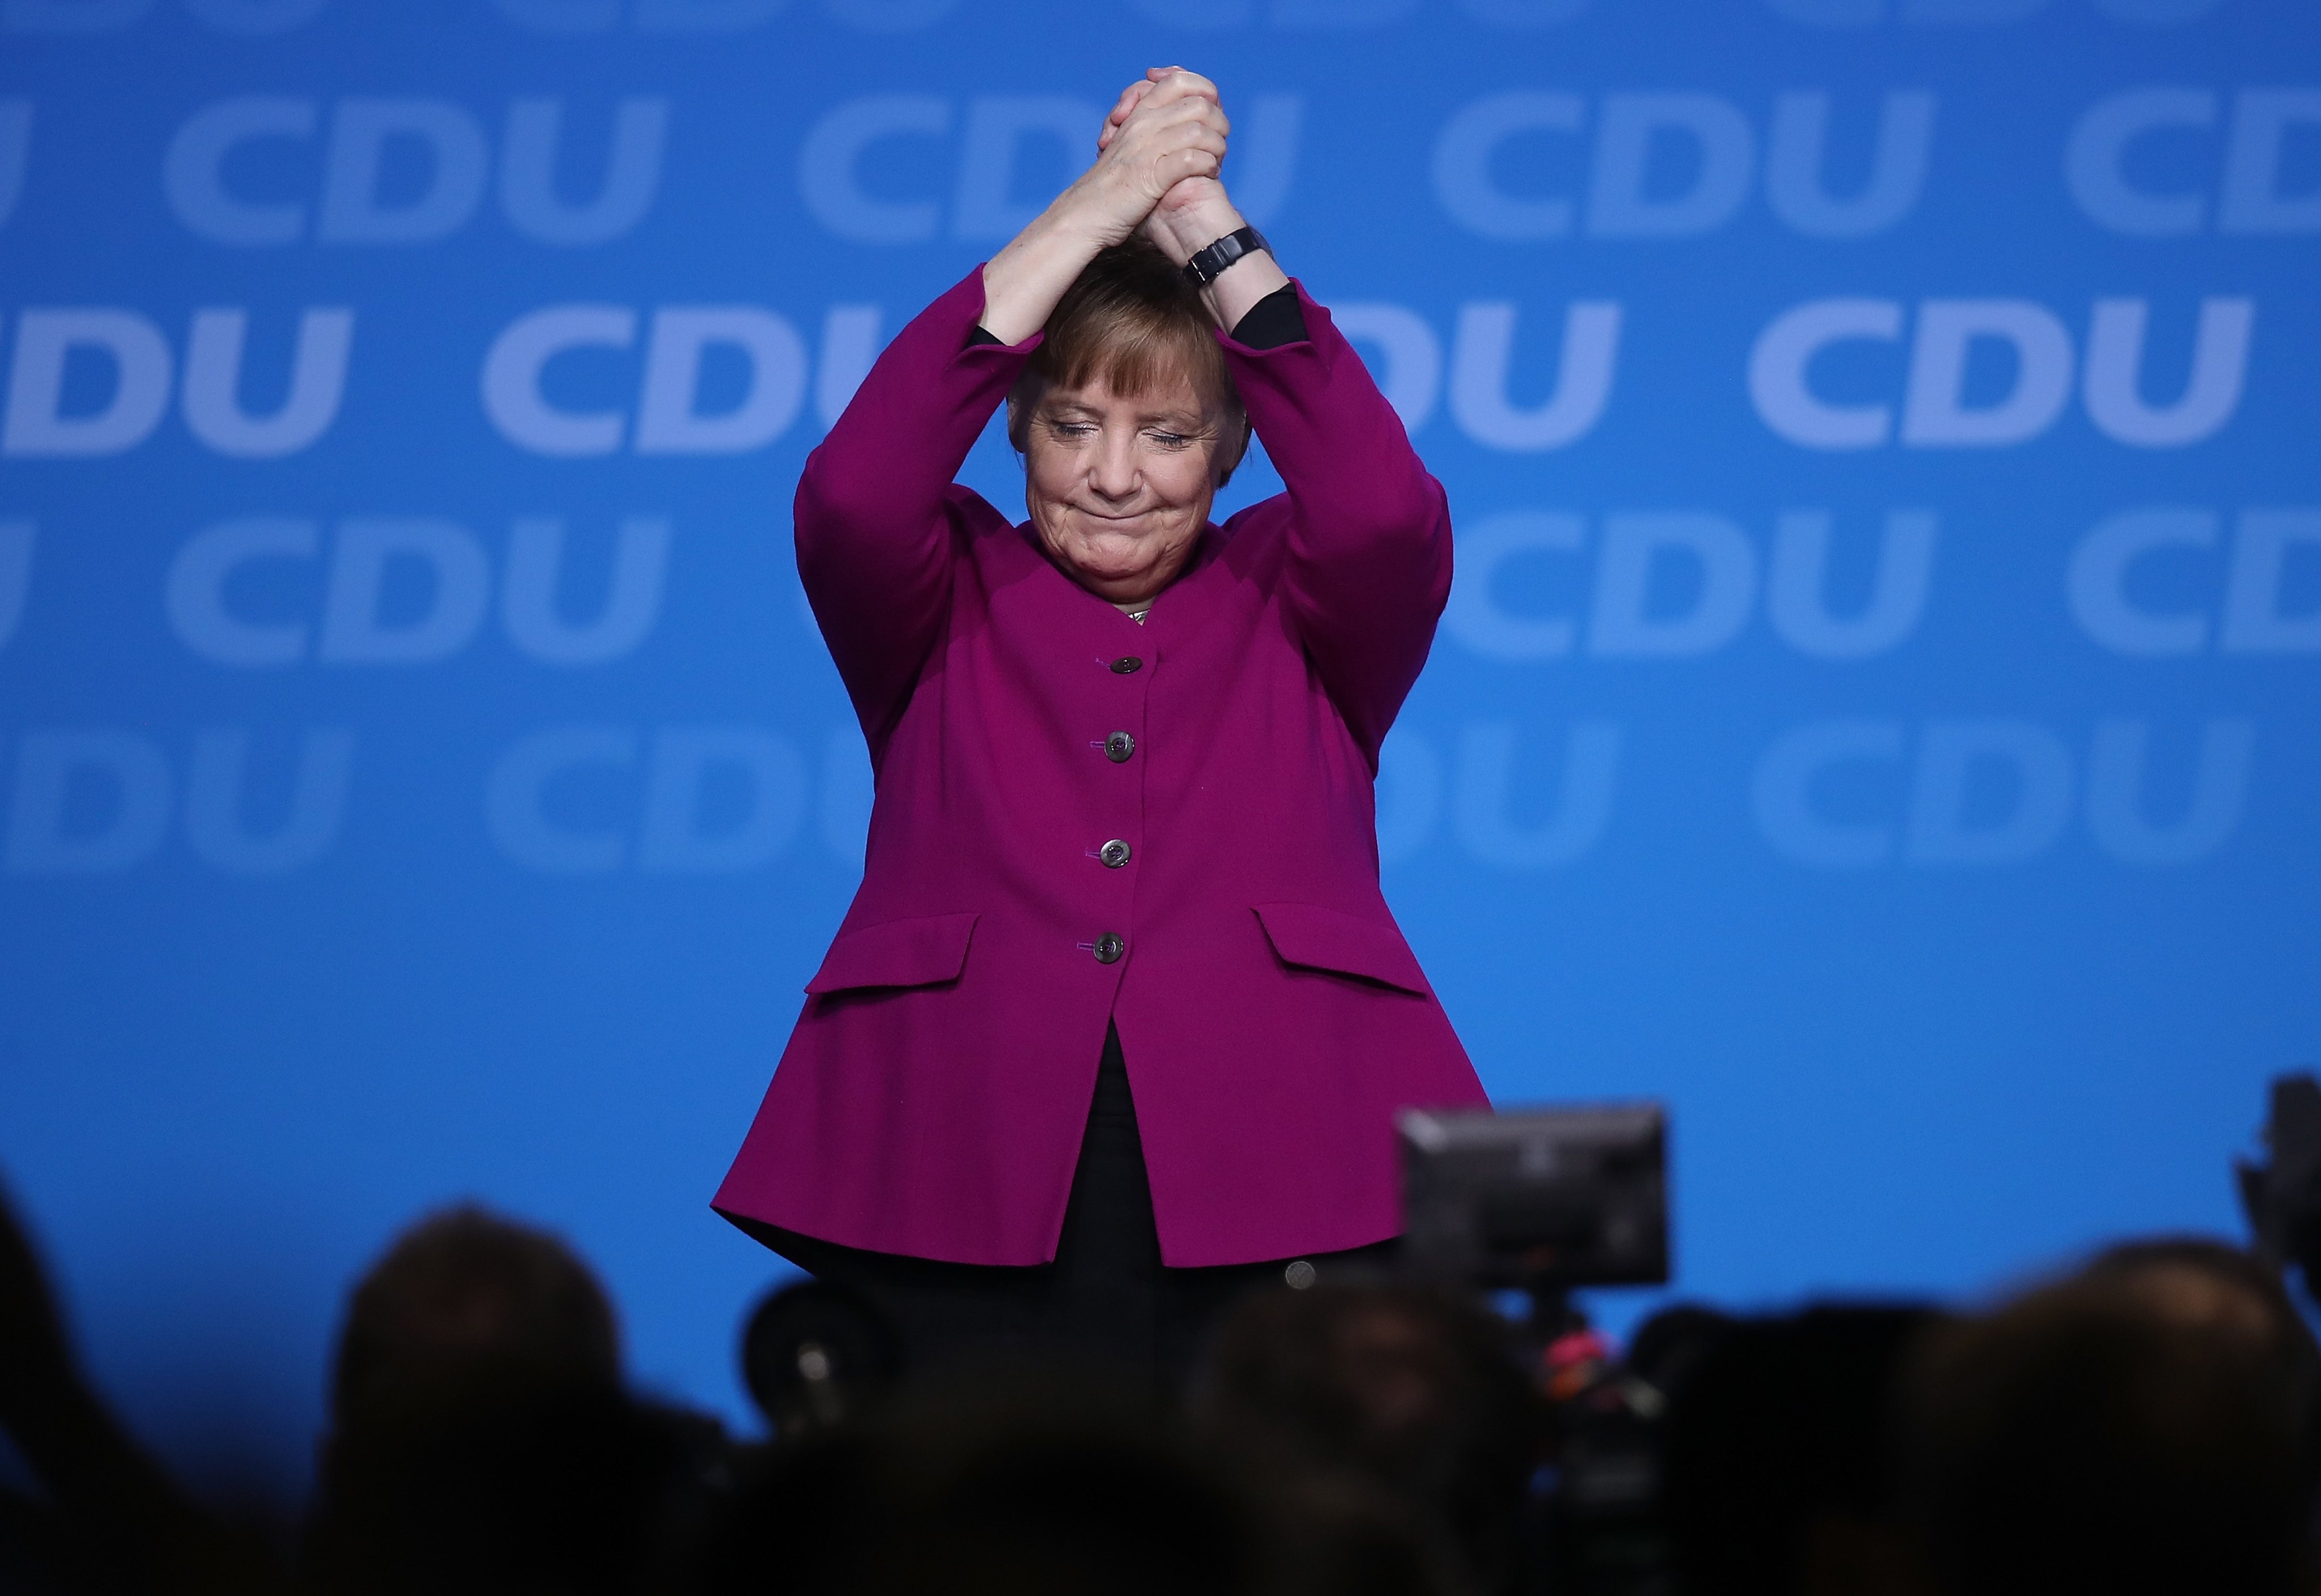 CDU Holds Party Congress, Elects General Secretary